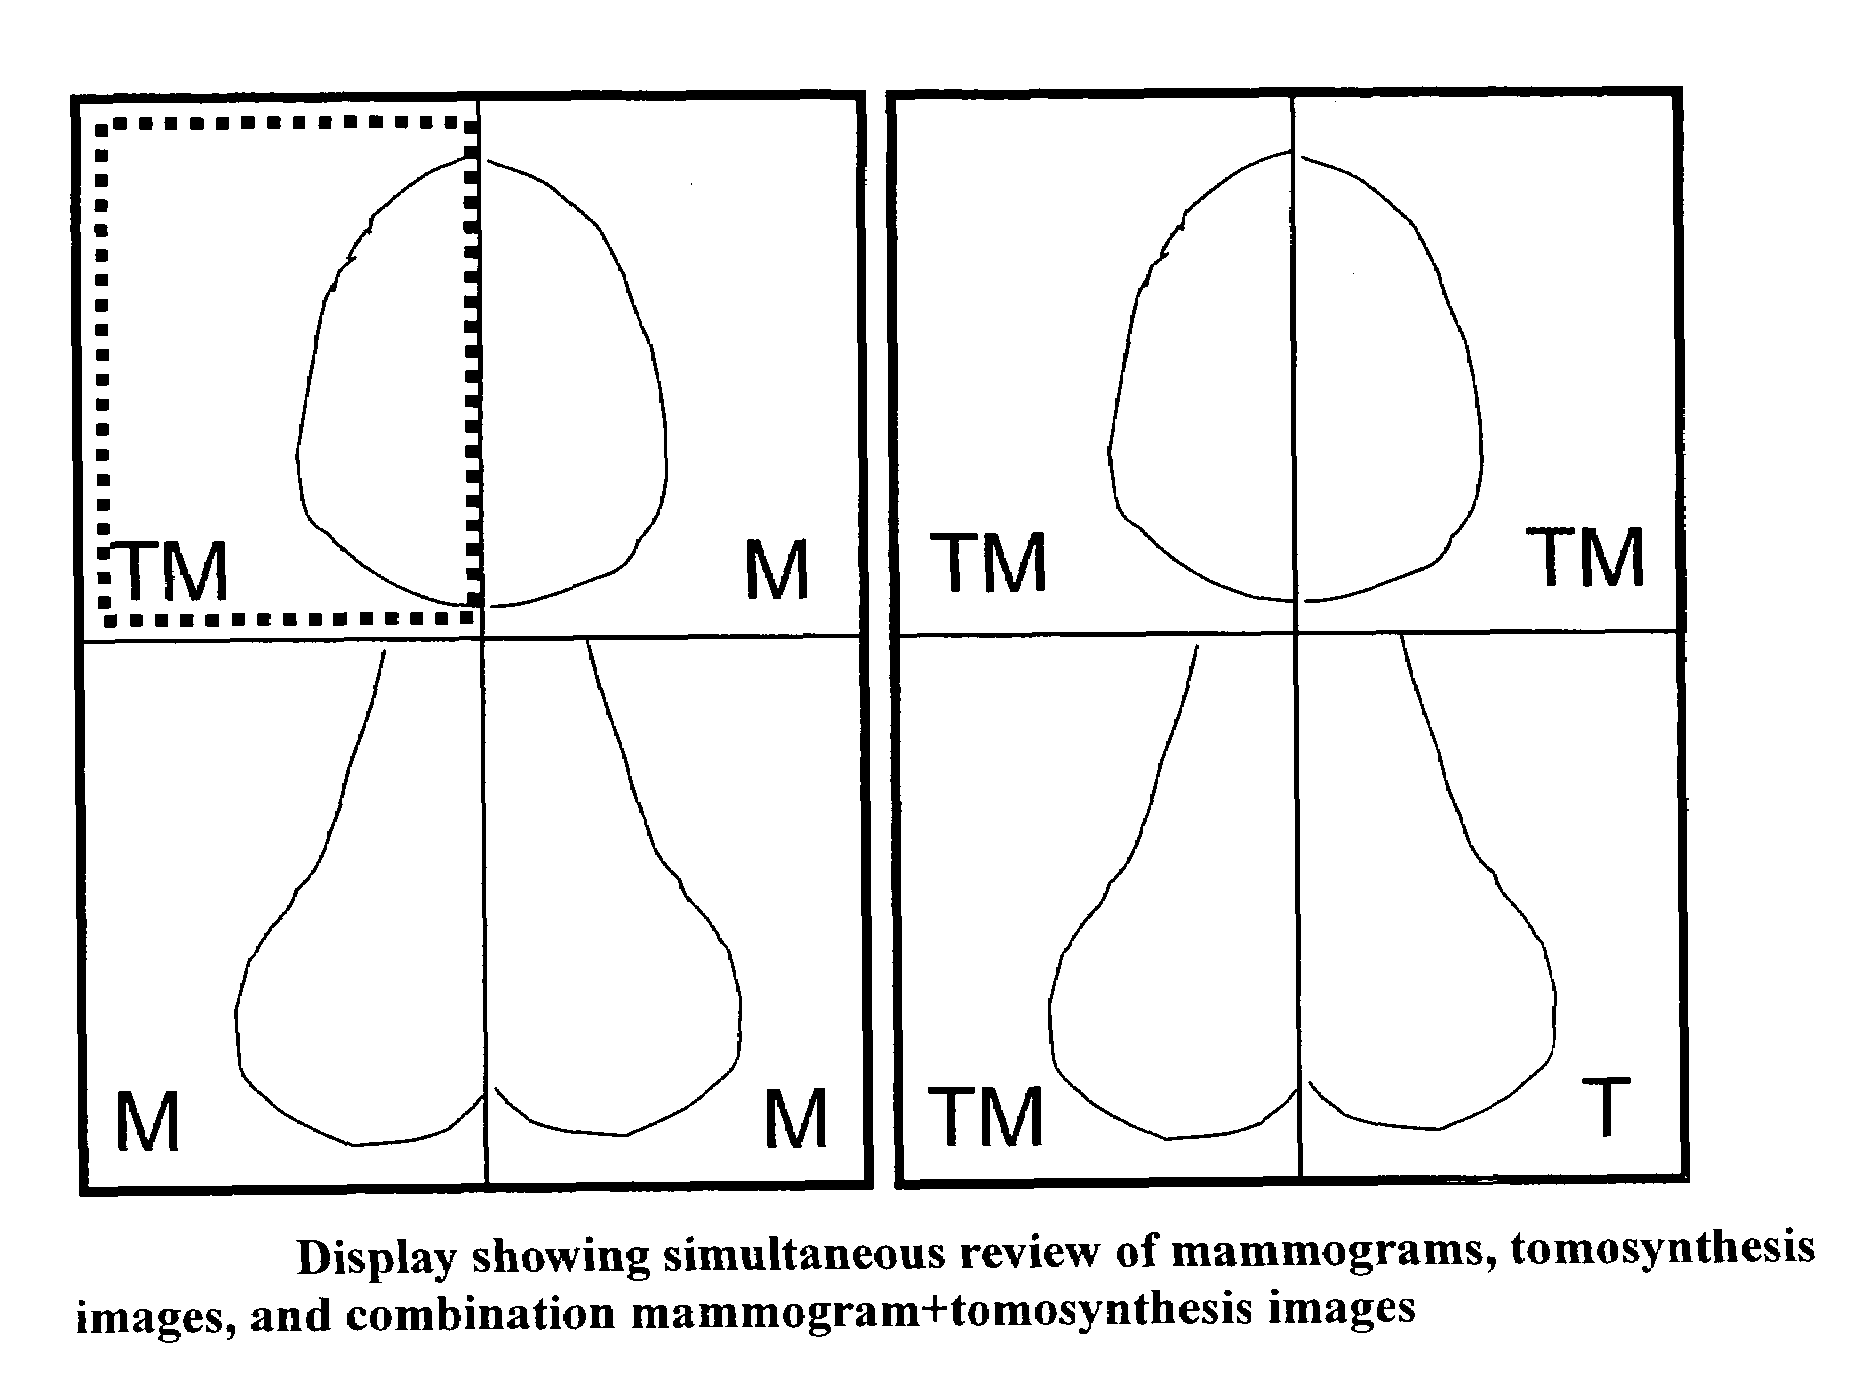 Image handling and display in X-ray mammography and tomosynthesis